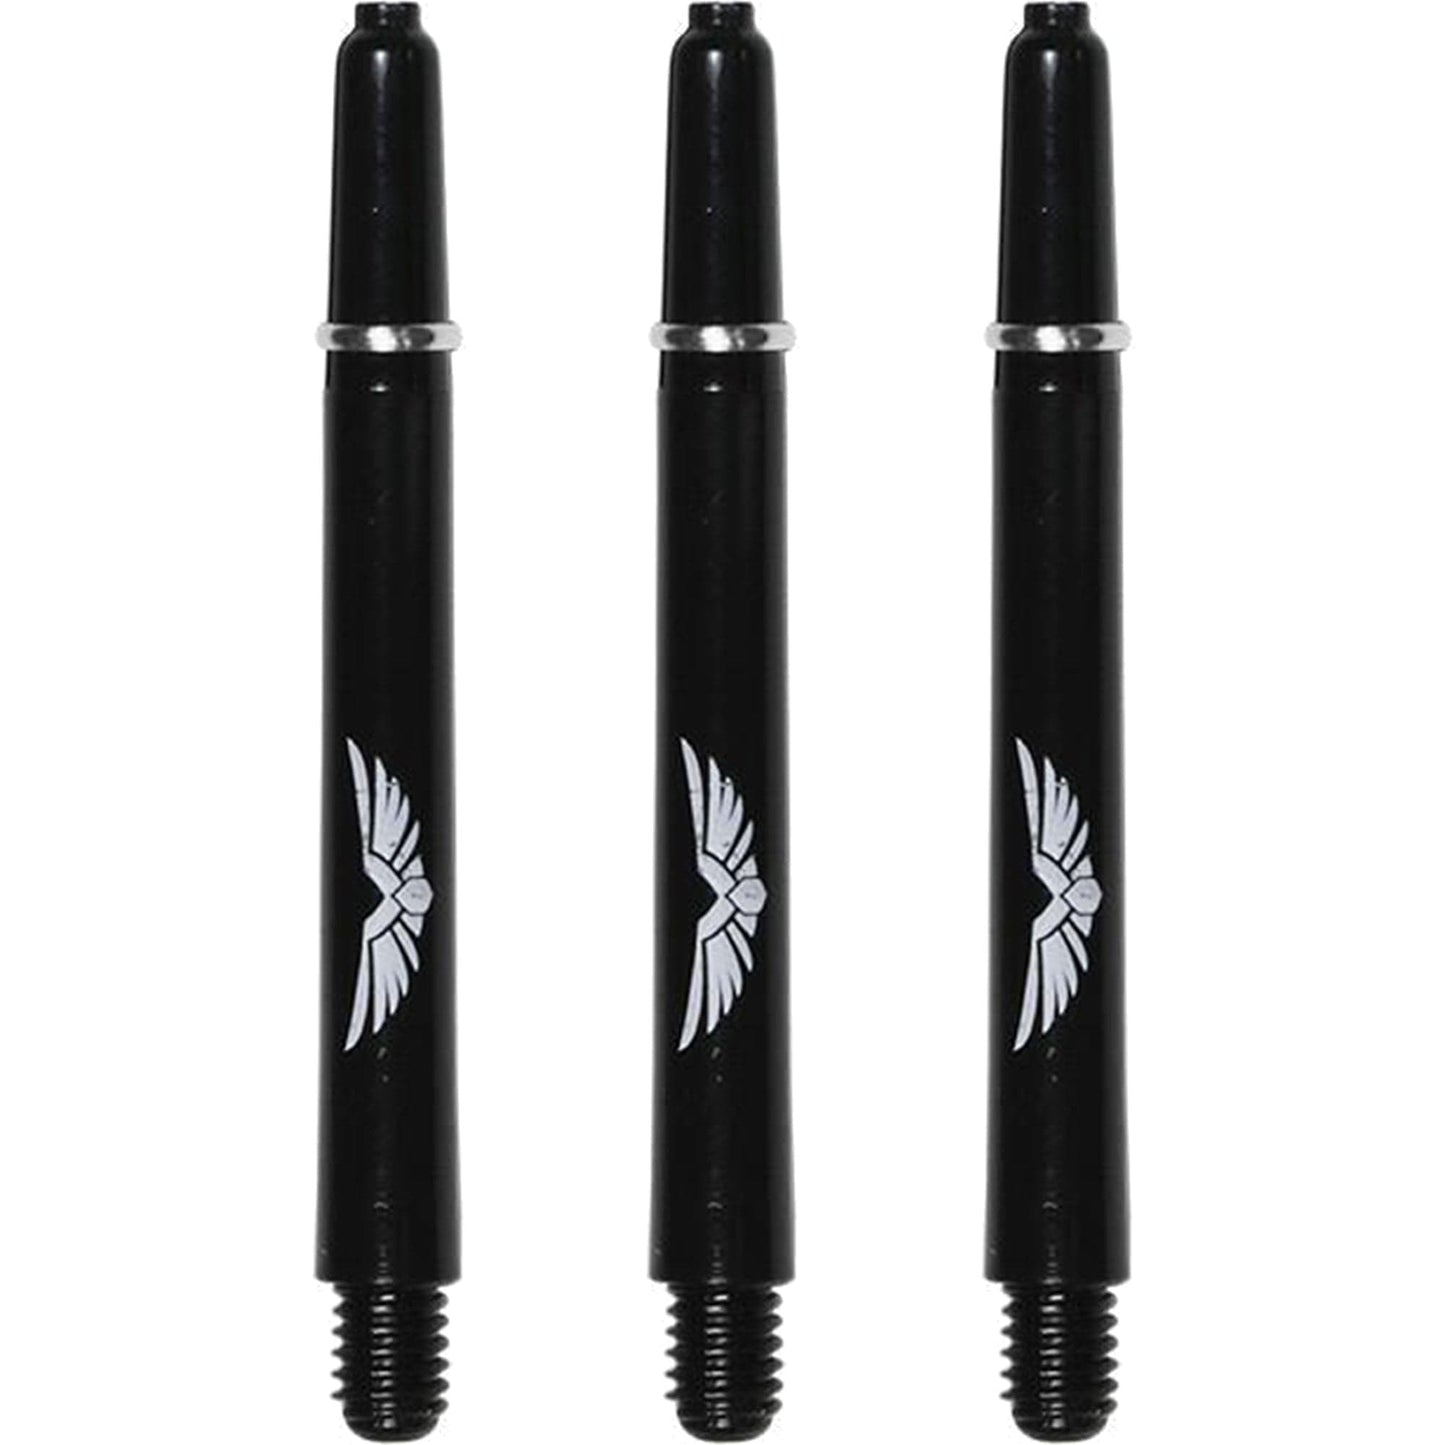 Shot Eagle Claw Dart Shafts - with Machined Rings - Strong Polycarbonate Stems - Black Medium